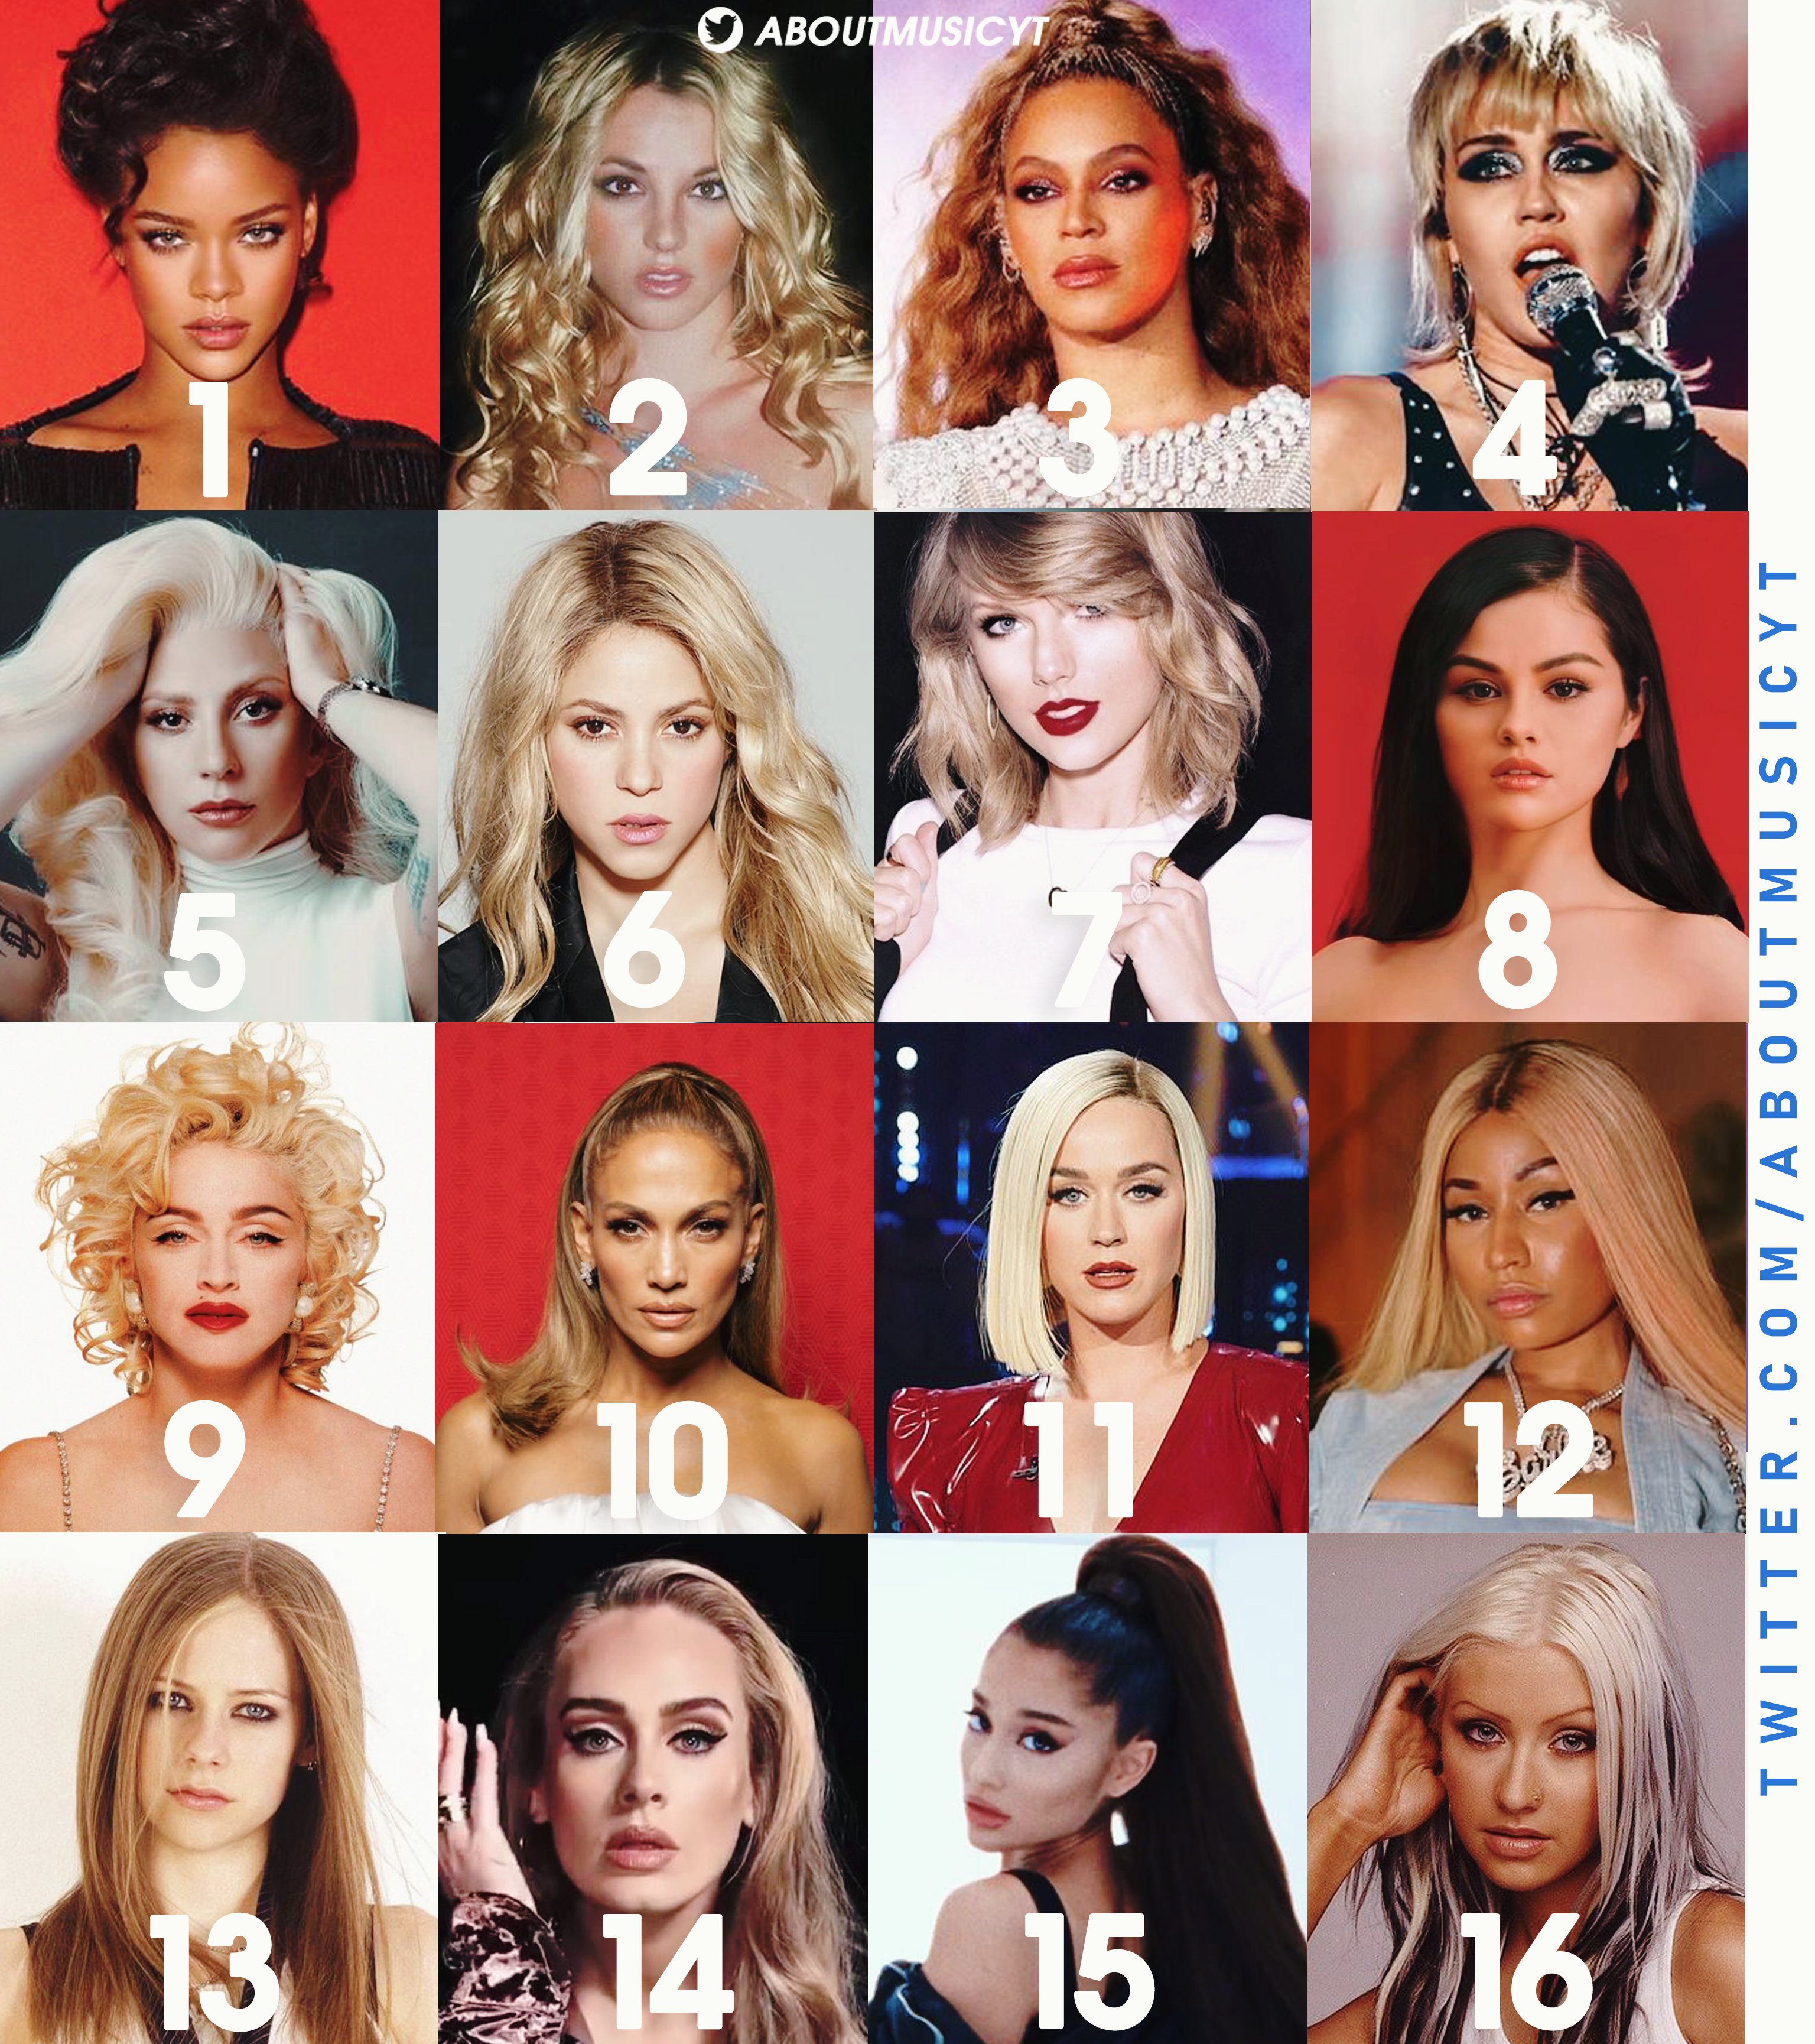 tand lave mad slot About Music Charts on Twitter: "Most searched female artists on Google of  all-time: https://t.co/V07uL0zP3b" / Twitter